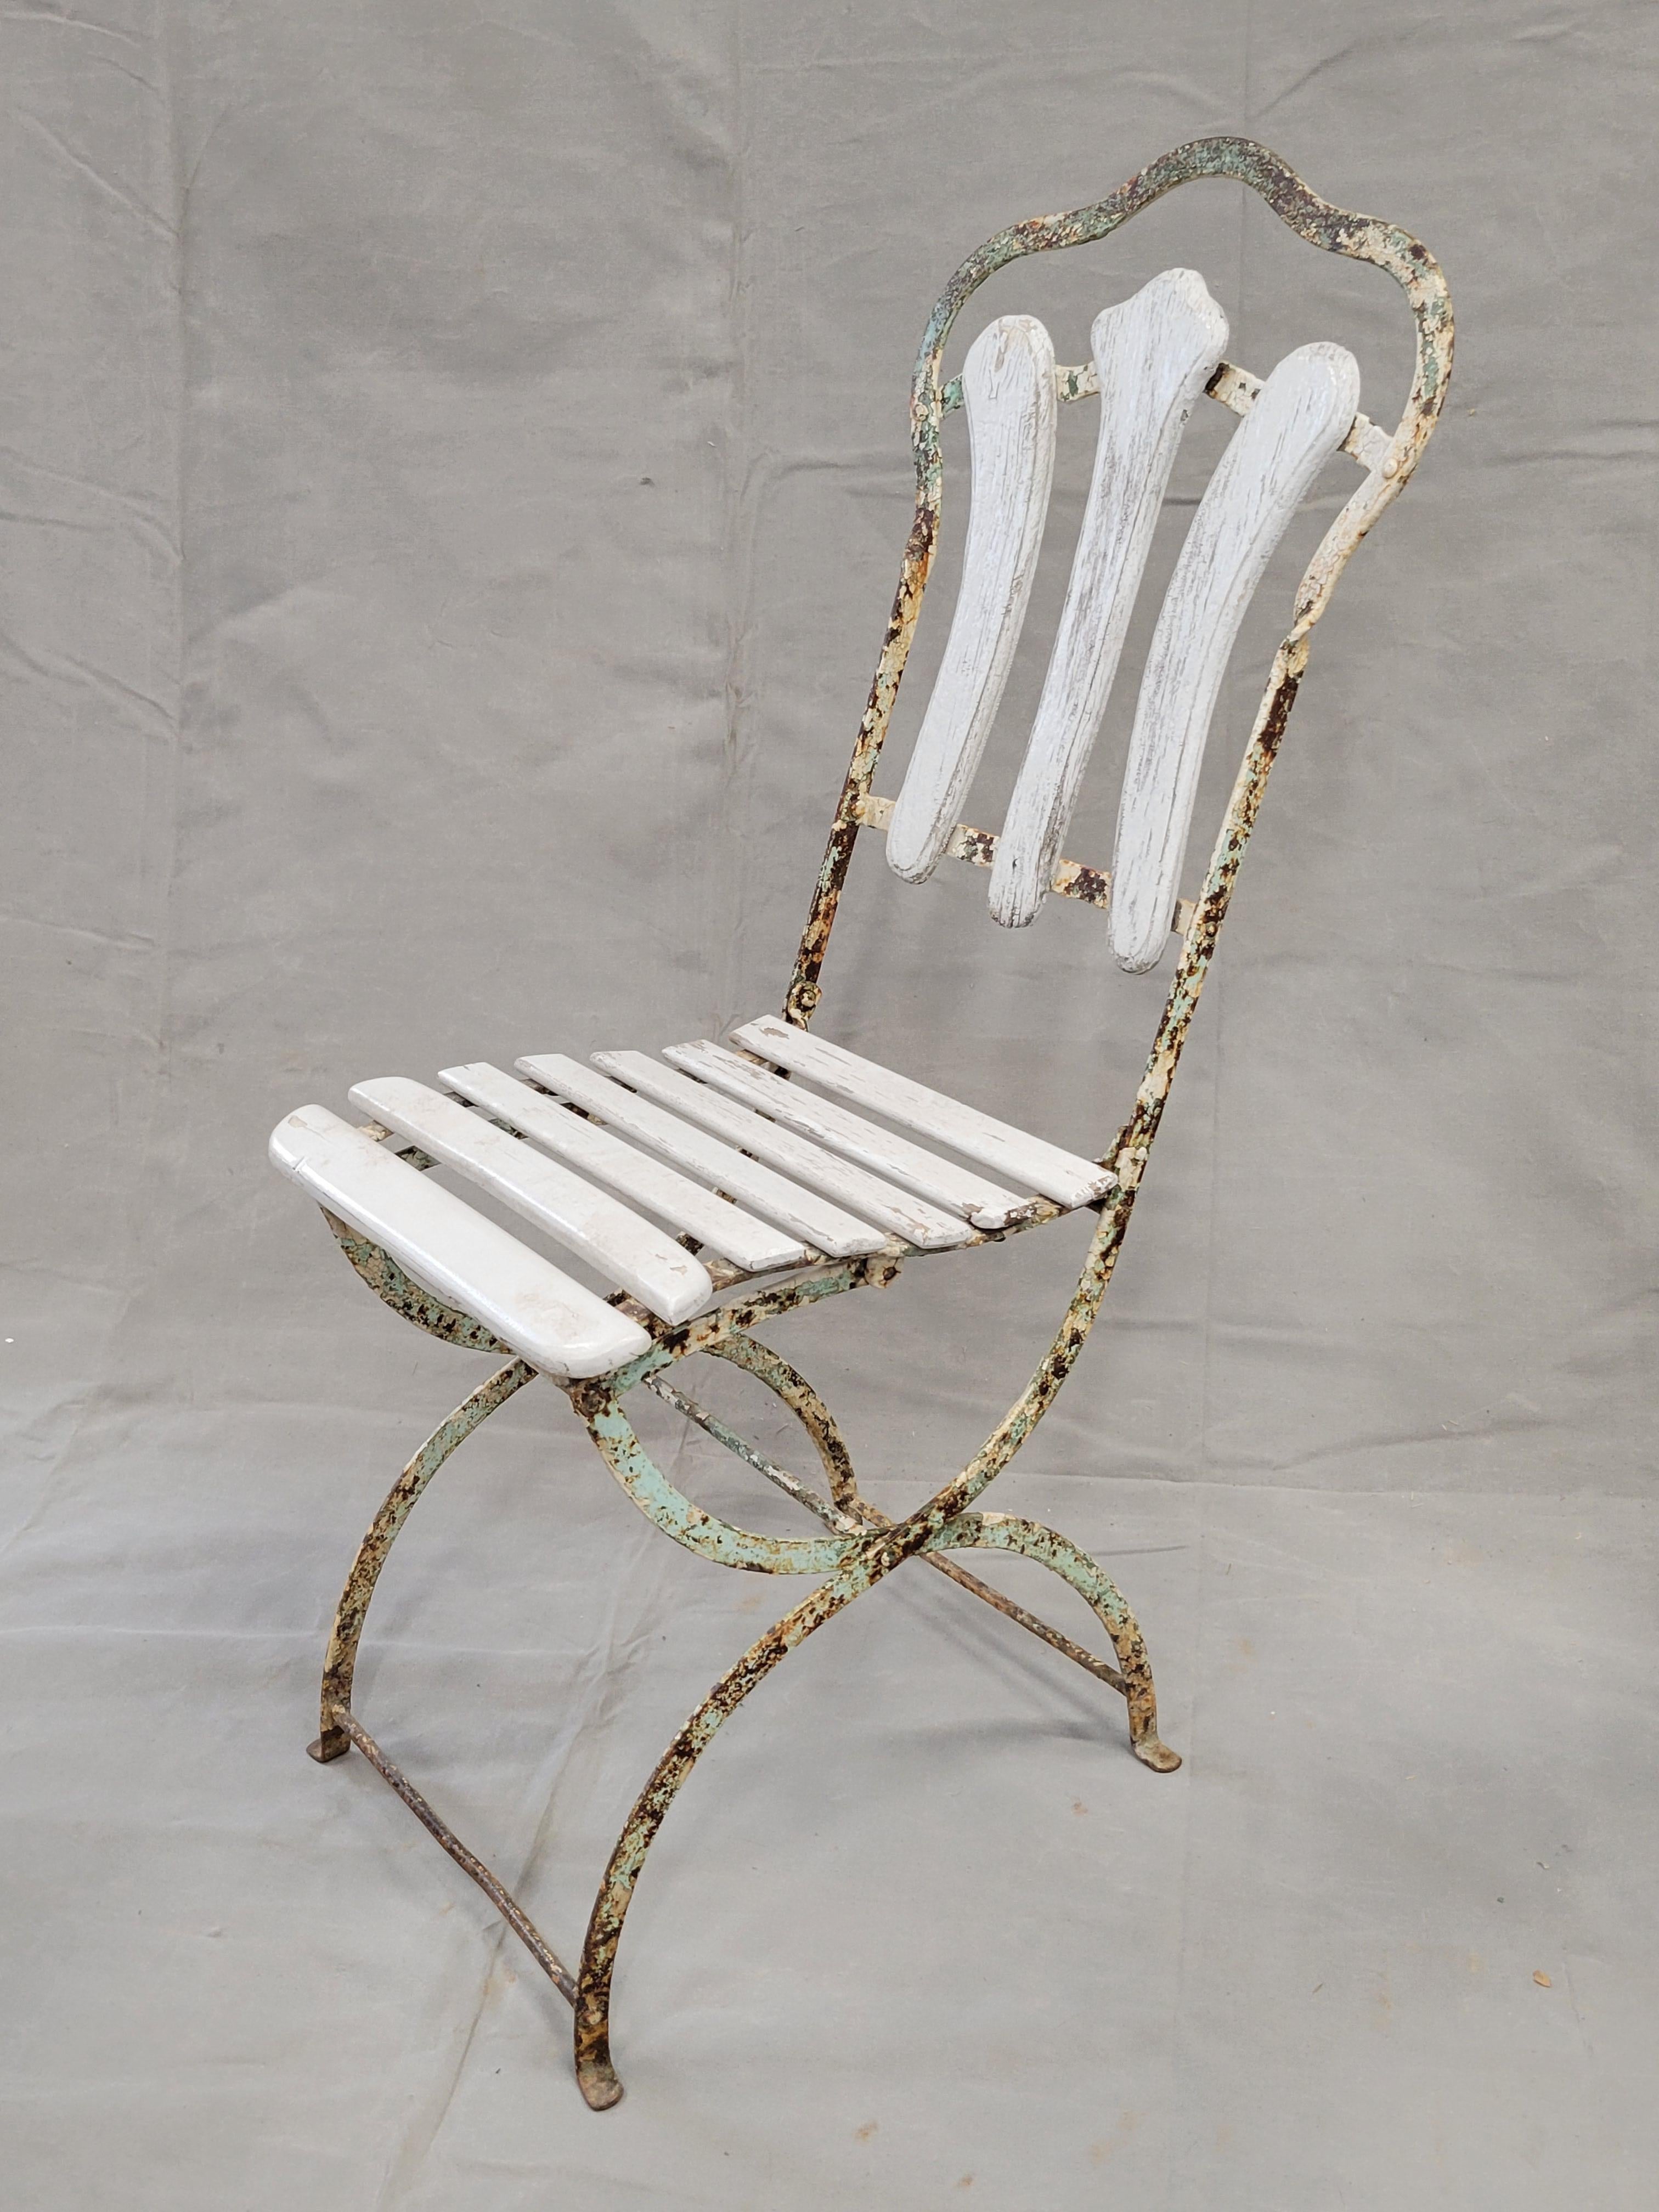 Antique French Iron and Wood Folding Bistro Garden Chairs - Set of 3 In Good Condition For Sale In Centennial, CO